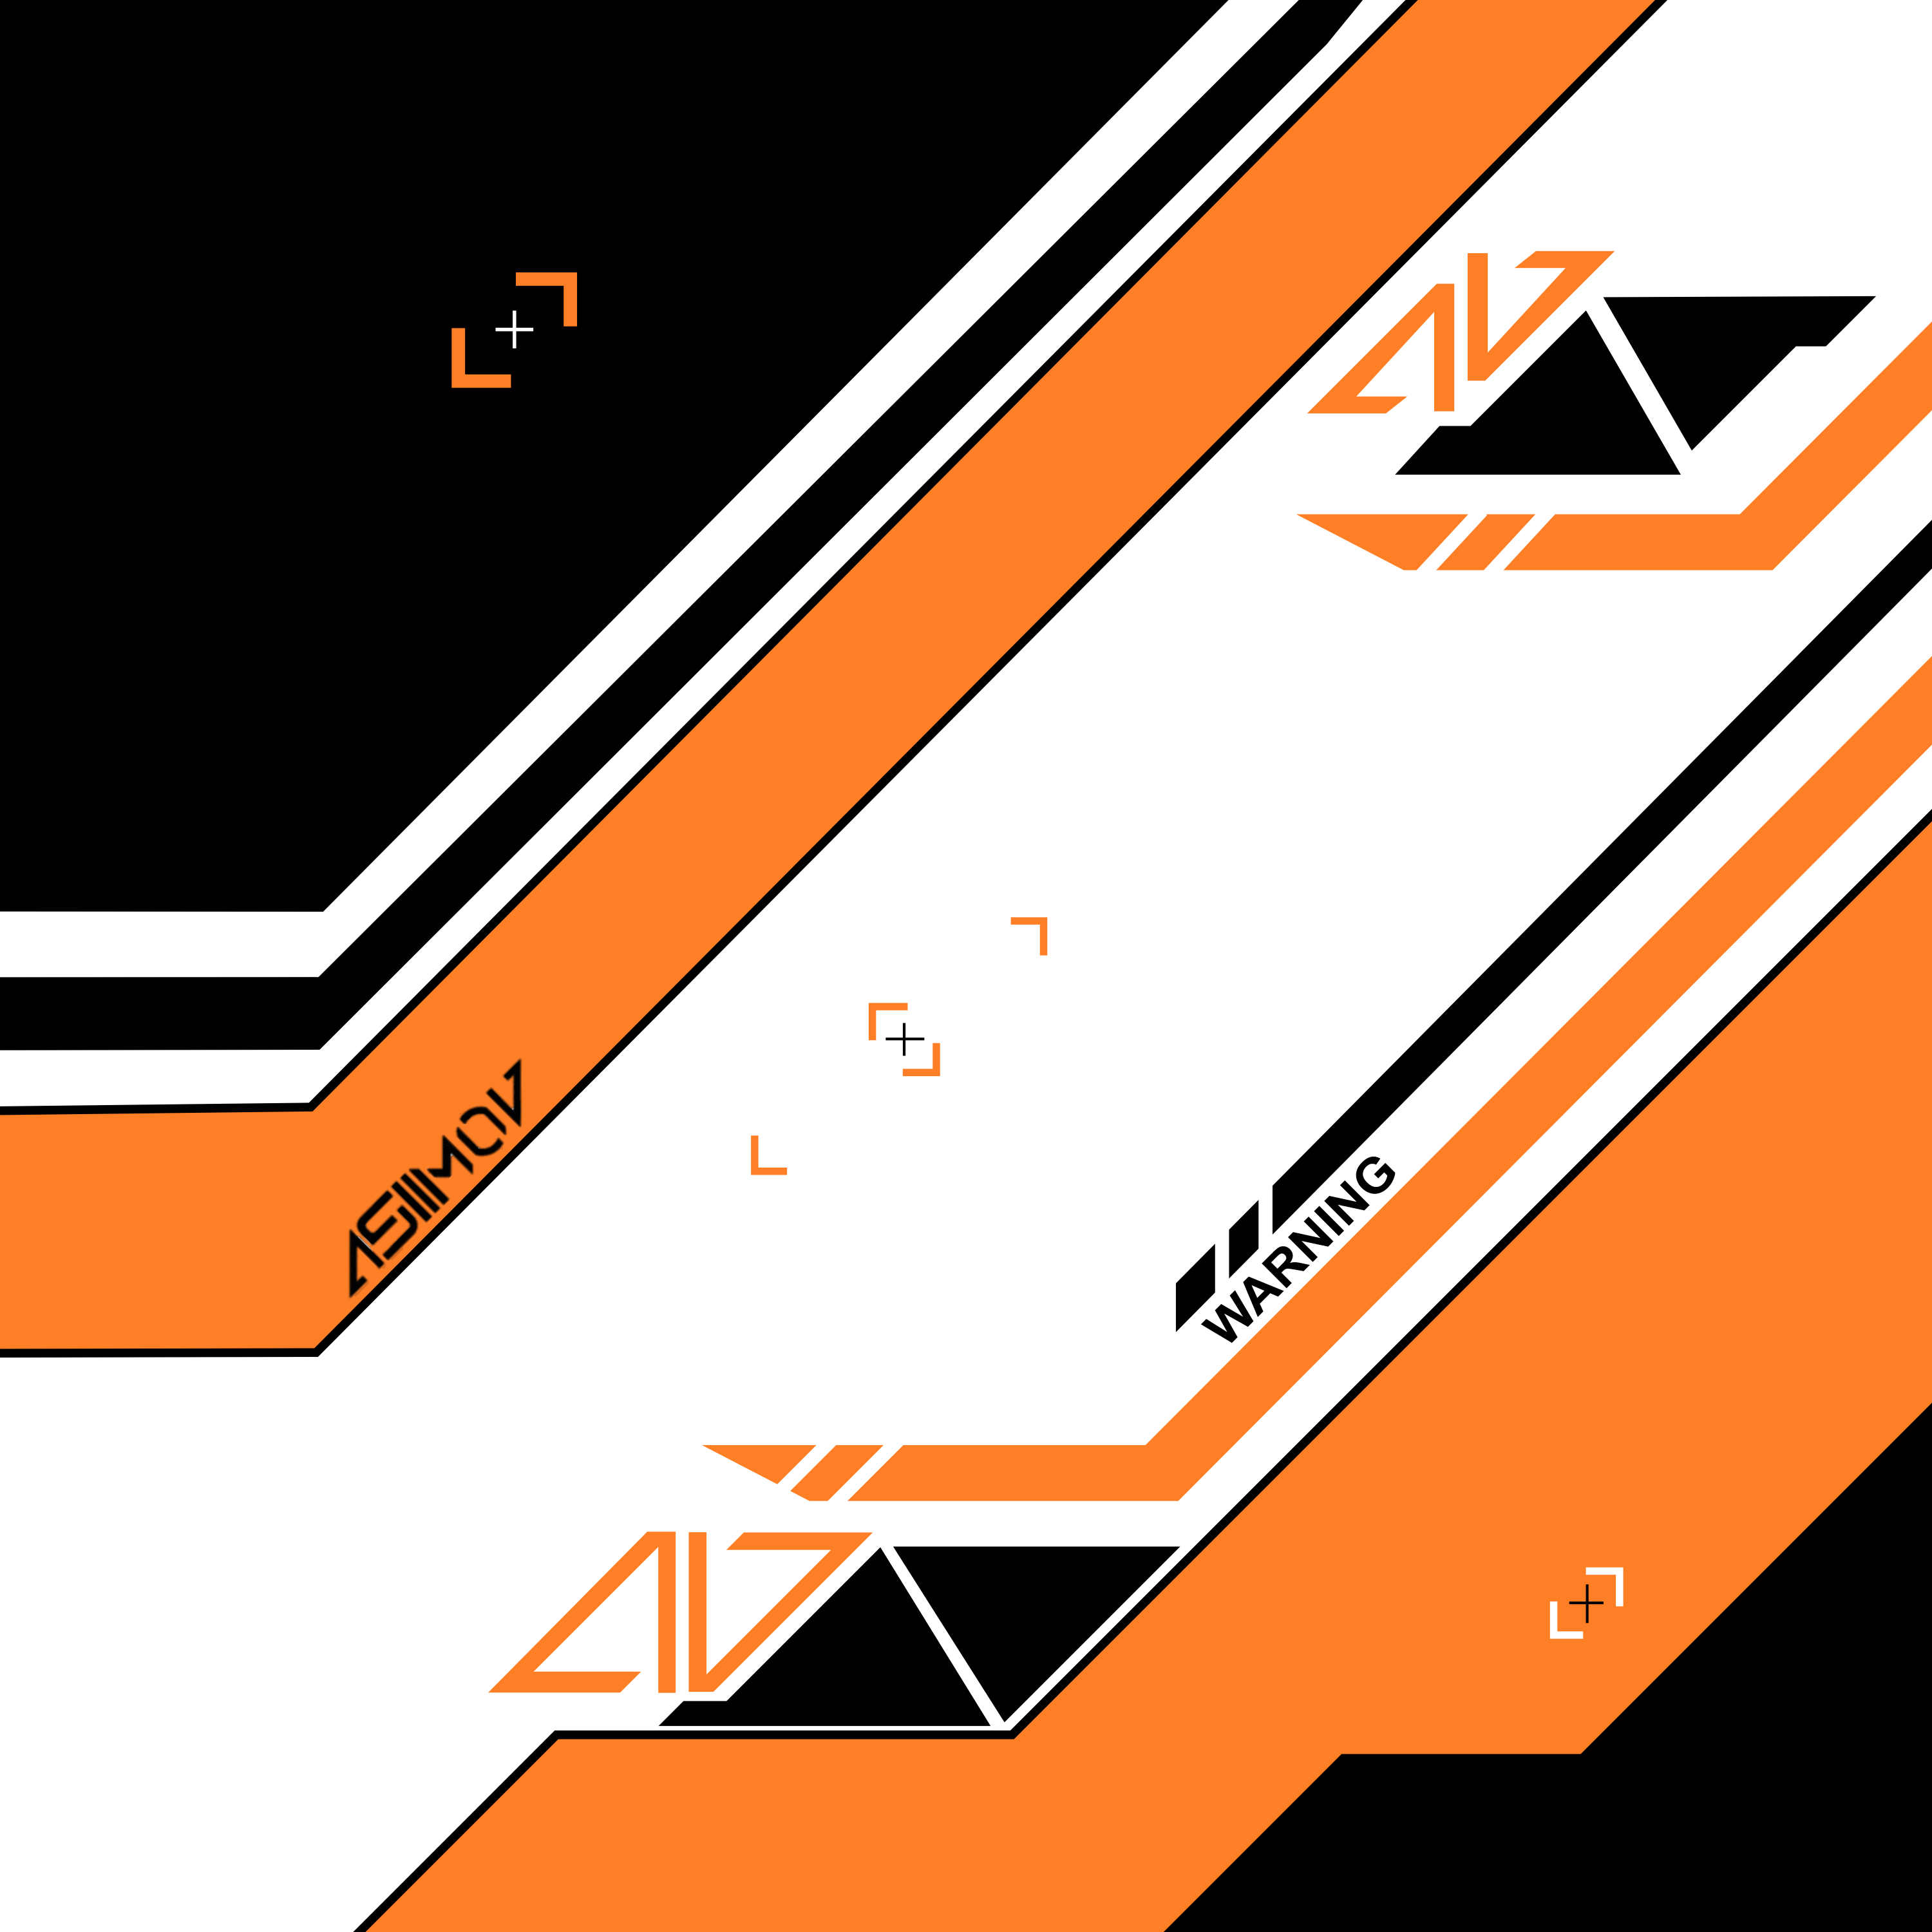 Asiimov Themed iPhone Wallpaper Made By Myself Its In 5s 5c